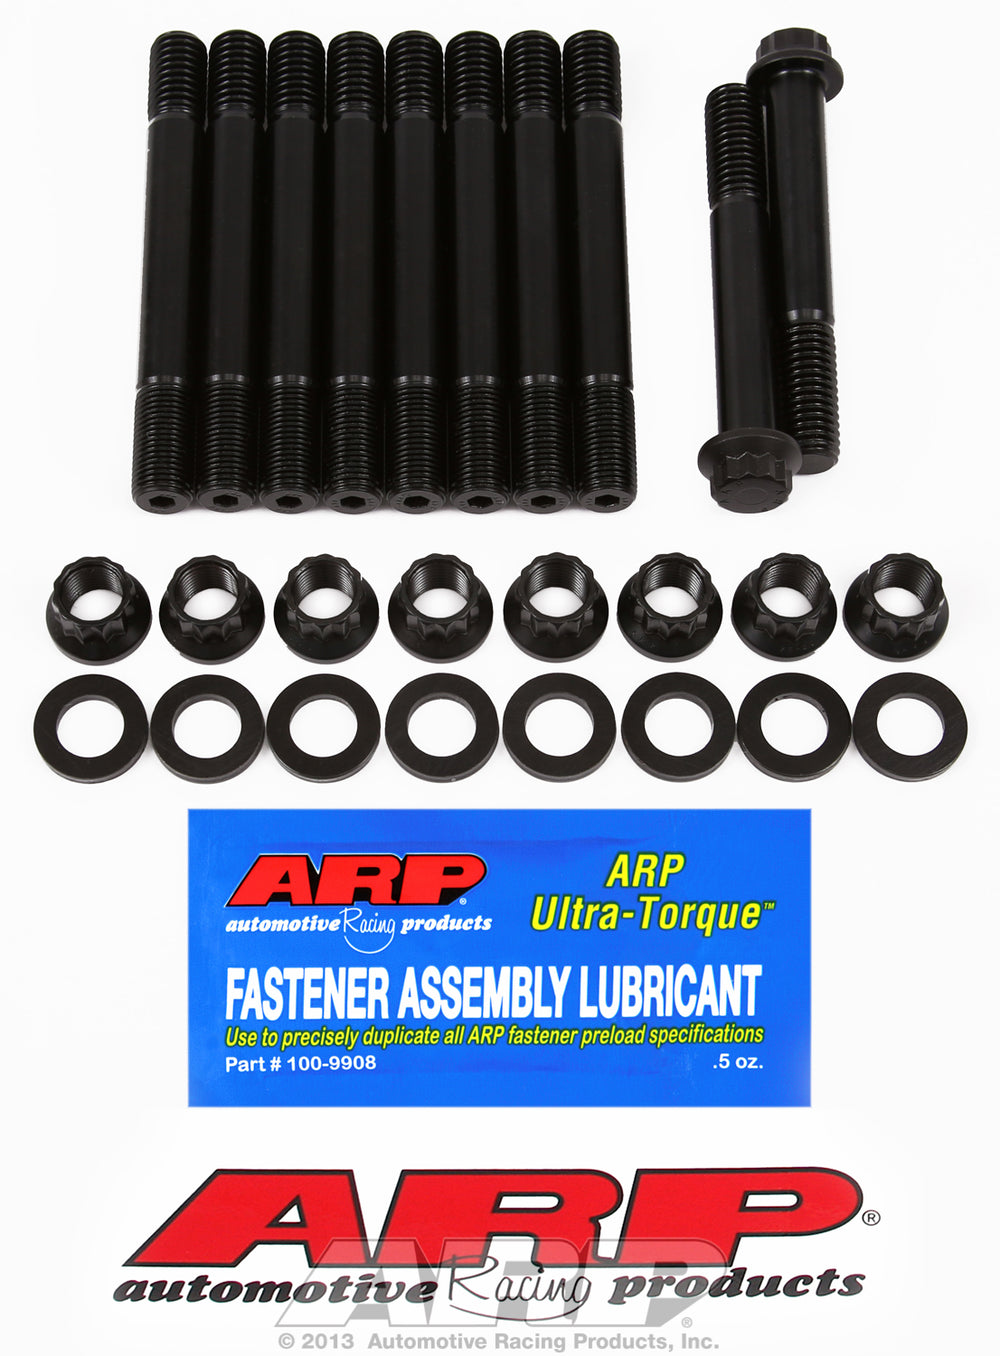 Main Stud Kit for Ford 390-428 cid FE series (12 pt nuts, 8 studs & 2 bolts for #5 cap) - no modific